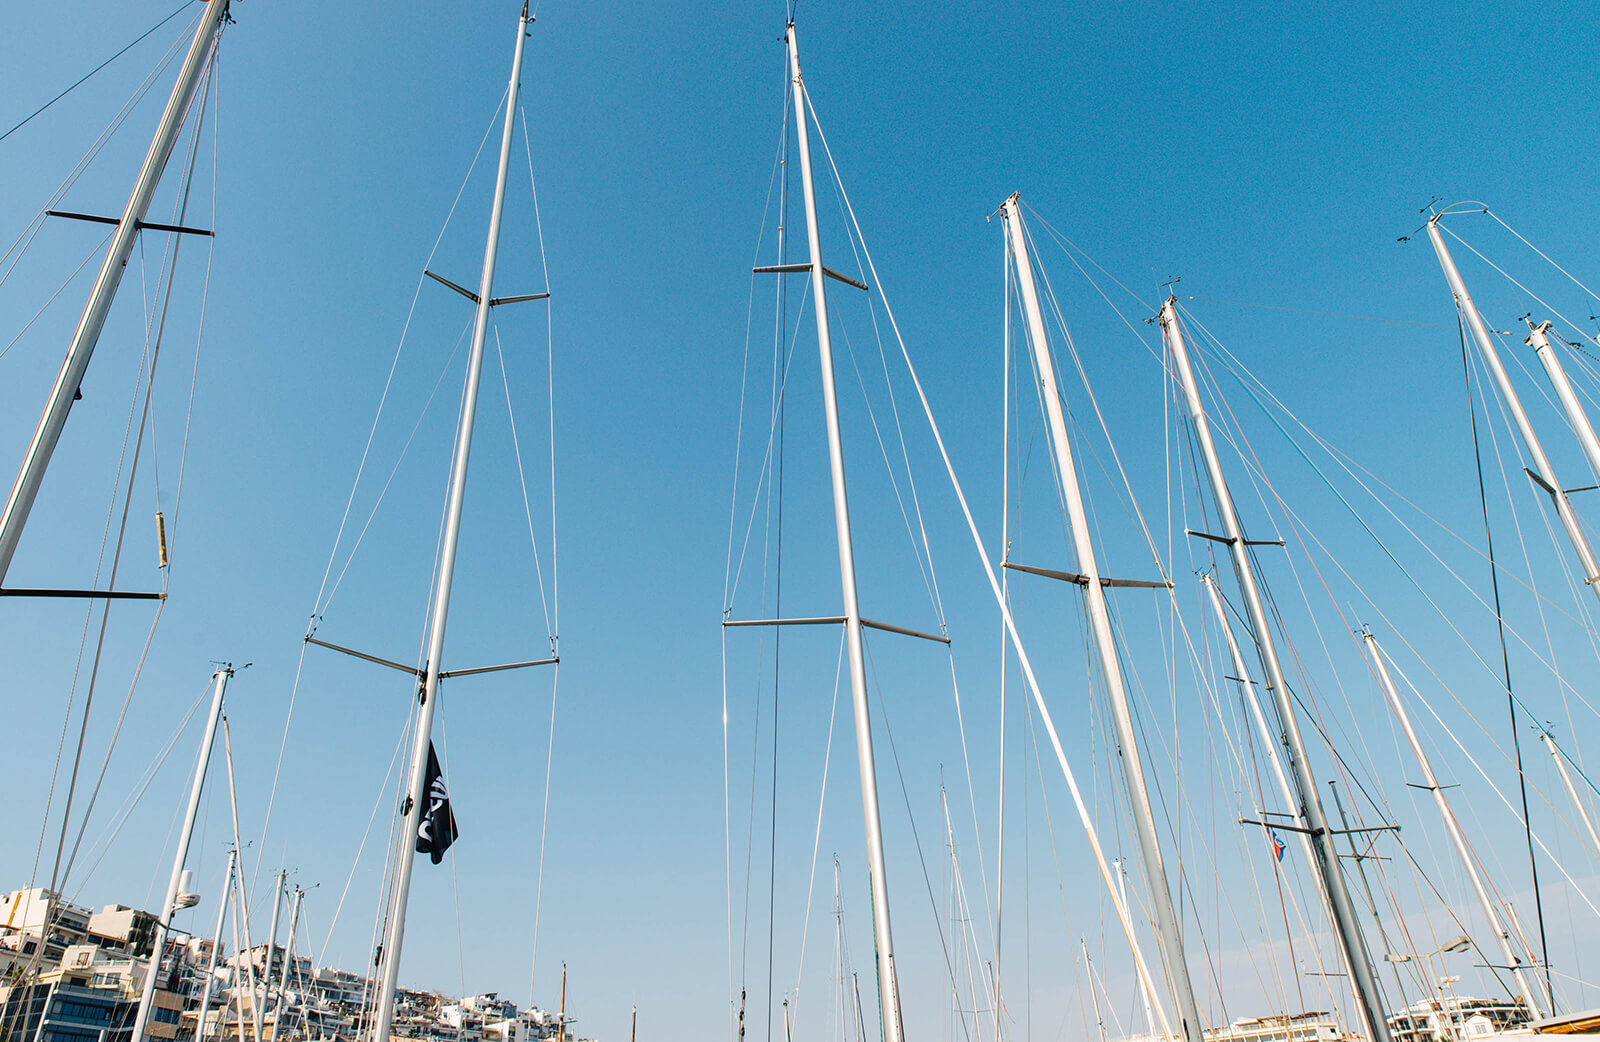 Sailing masts against blue skies: a sight that never fails to delight. | Photo: Thomas Gravanis 